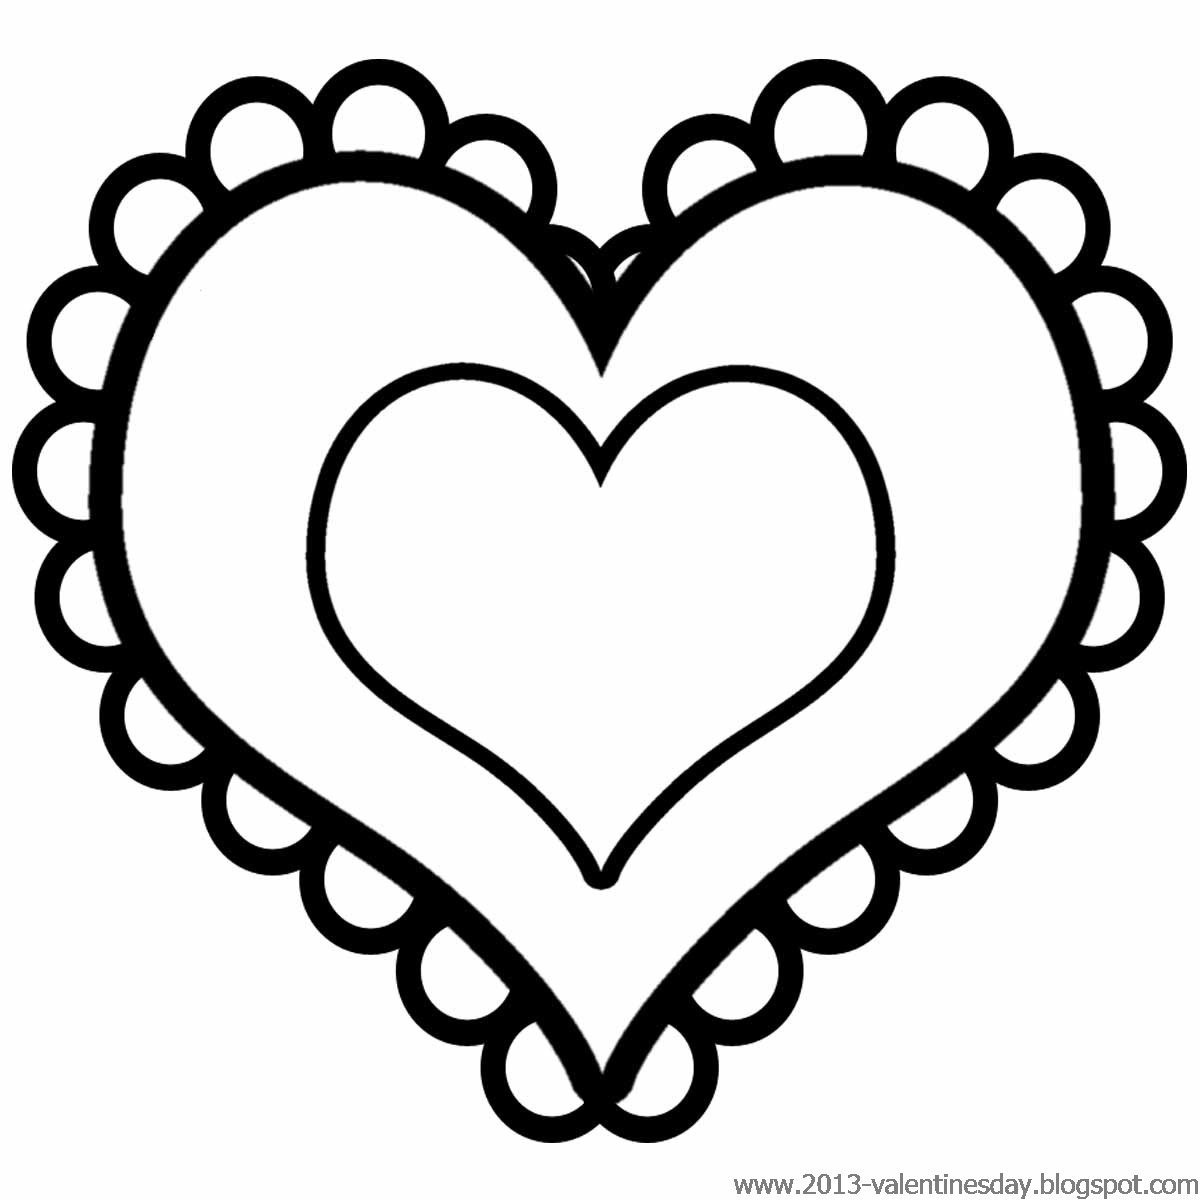 Heart Clipart Black And White - HD clipart image - the heart clipart, simple human heart clipart, sacred heart of jesus clip art, hearts clip art free, hearts and arrows diamond clip art, heartbeat clipart png, heart frame clipart, heart clipart black and white, heart broken clipart, happy heart clipart, free heart clip art, finger heart clipart, cross with heart clipart, cross and heart clip art, conversation hearts clipart, clip art hearts black and white, clip art heart black and white, candy heart clipart, brown heart clipart, beating heart clipart